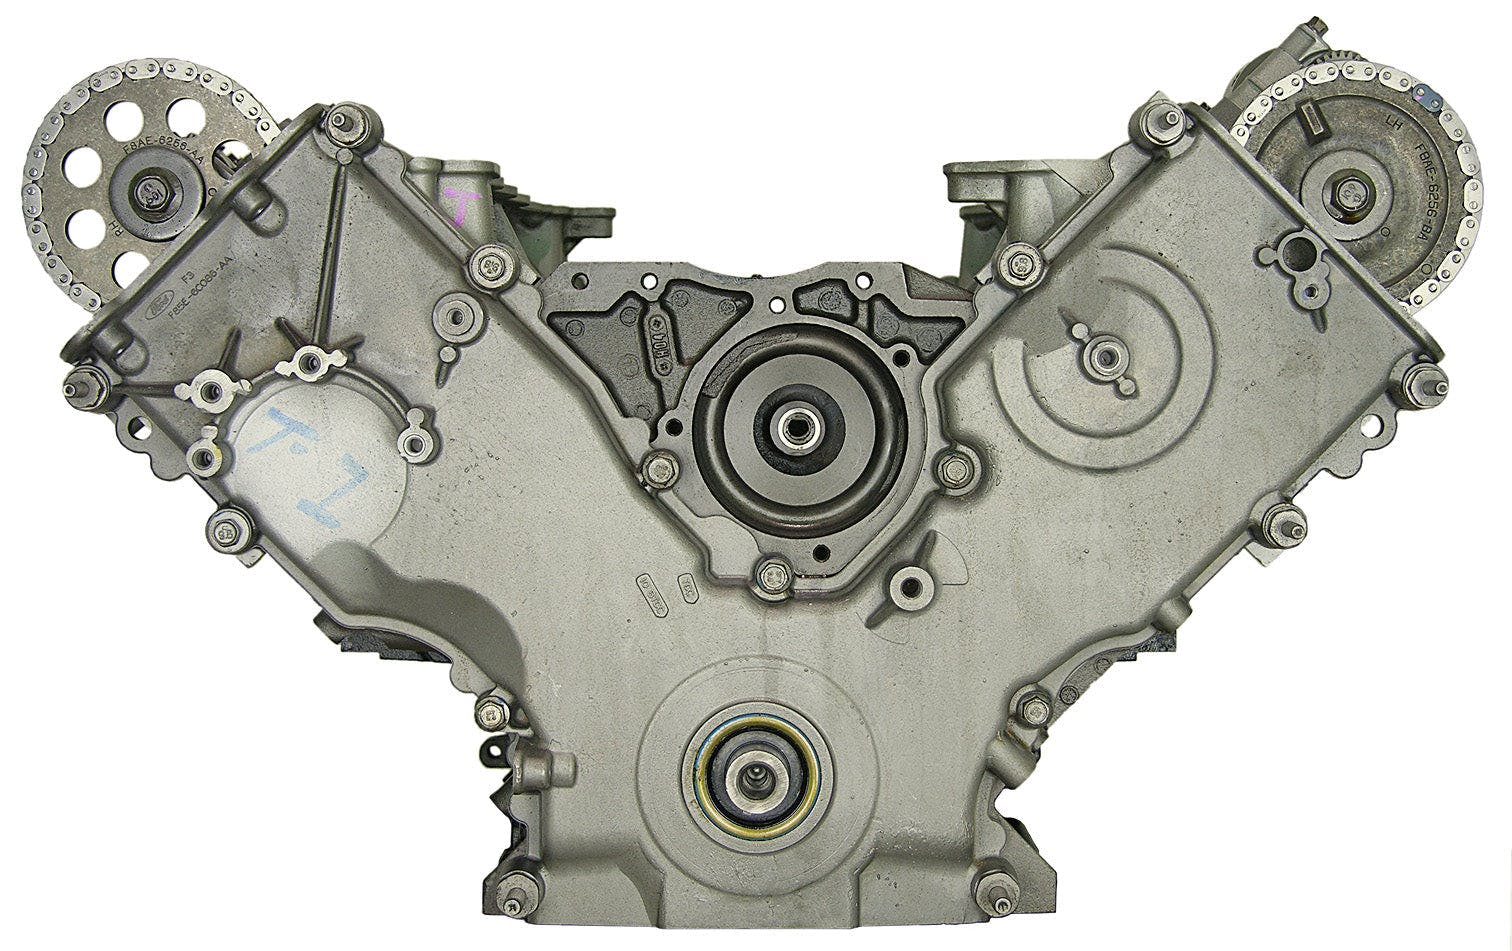 6.8L V10 Engine for 1999 Ford F-250 Super Duty/F-350 Super Duty/F-450 Super Duty/F-53 Motorhome Chassis/F-550 Super Duty